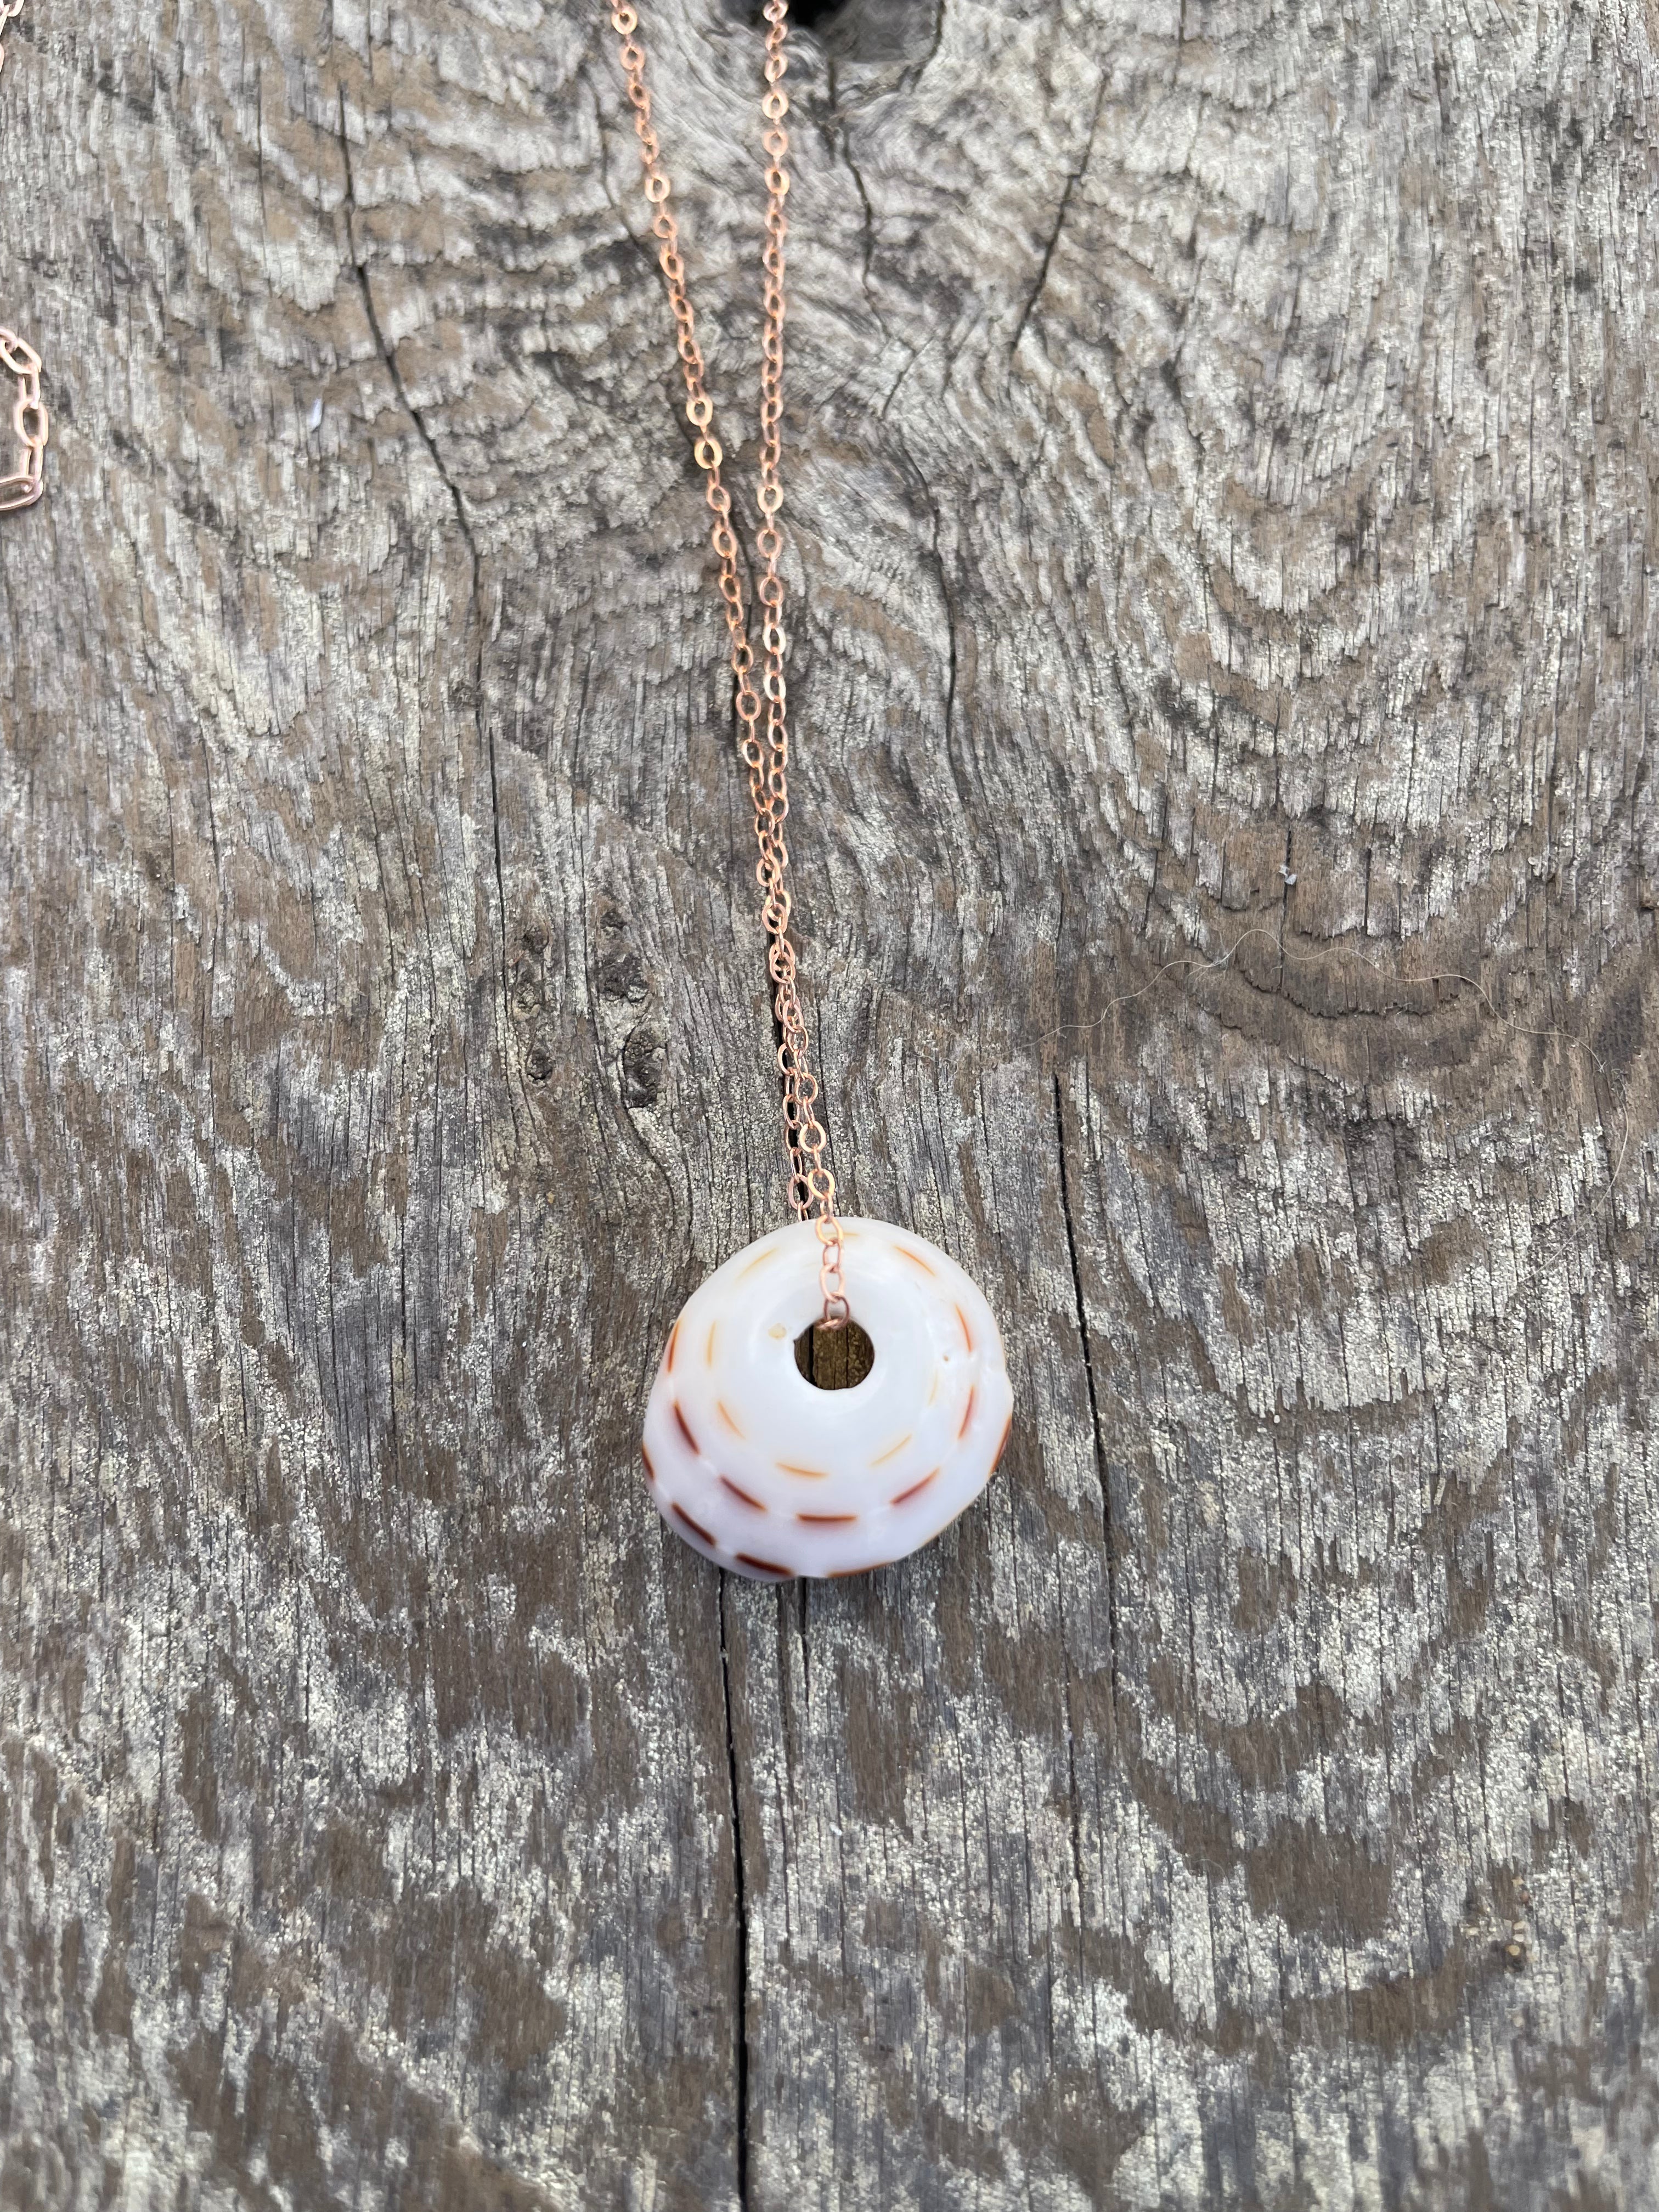 puka shell on a goldfilled chain on a wooden background